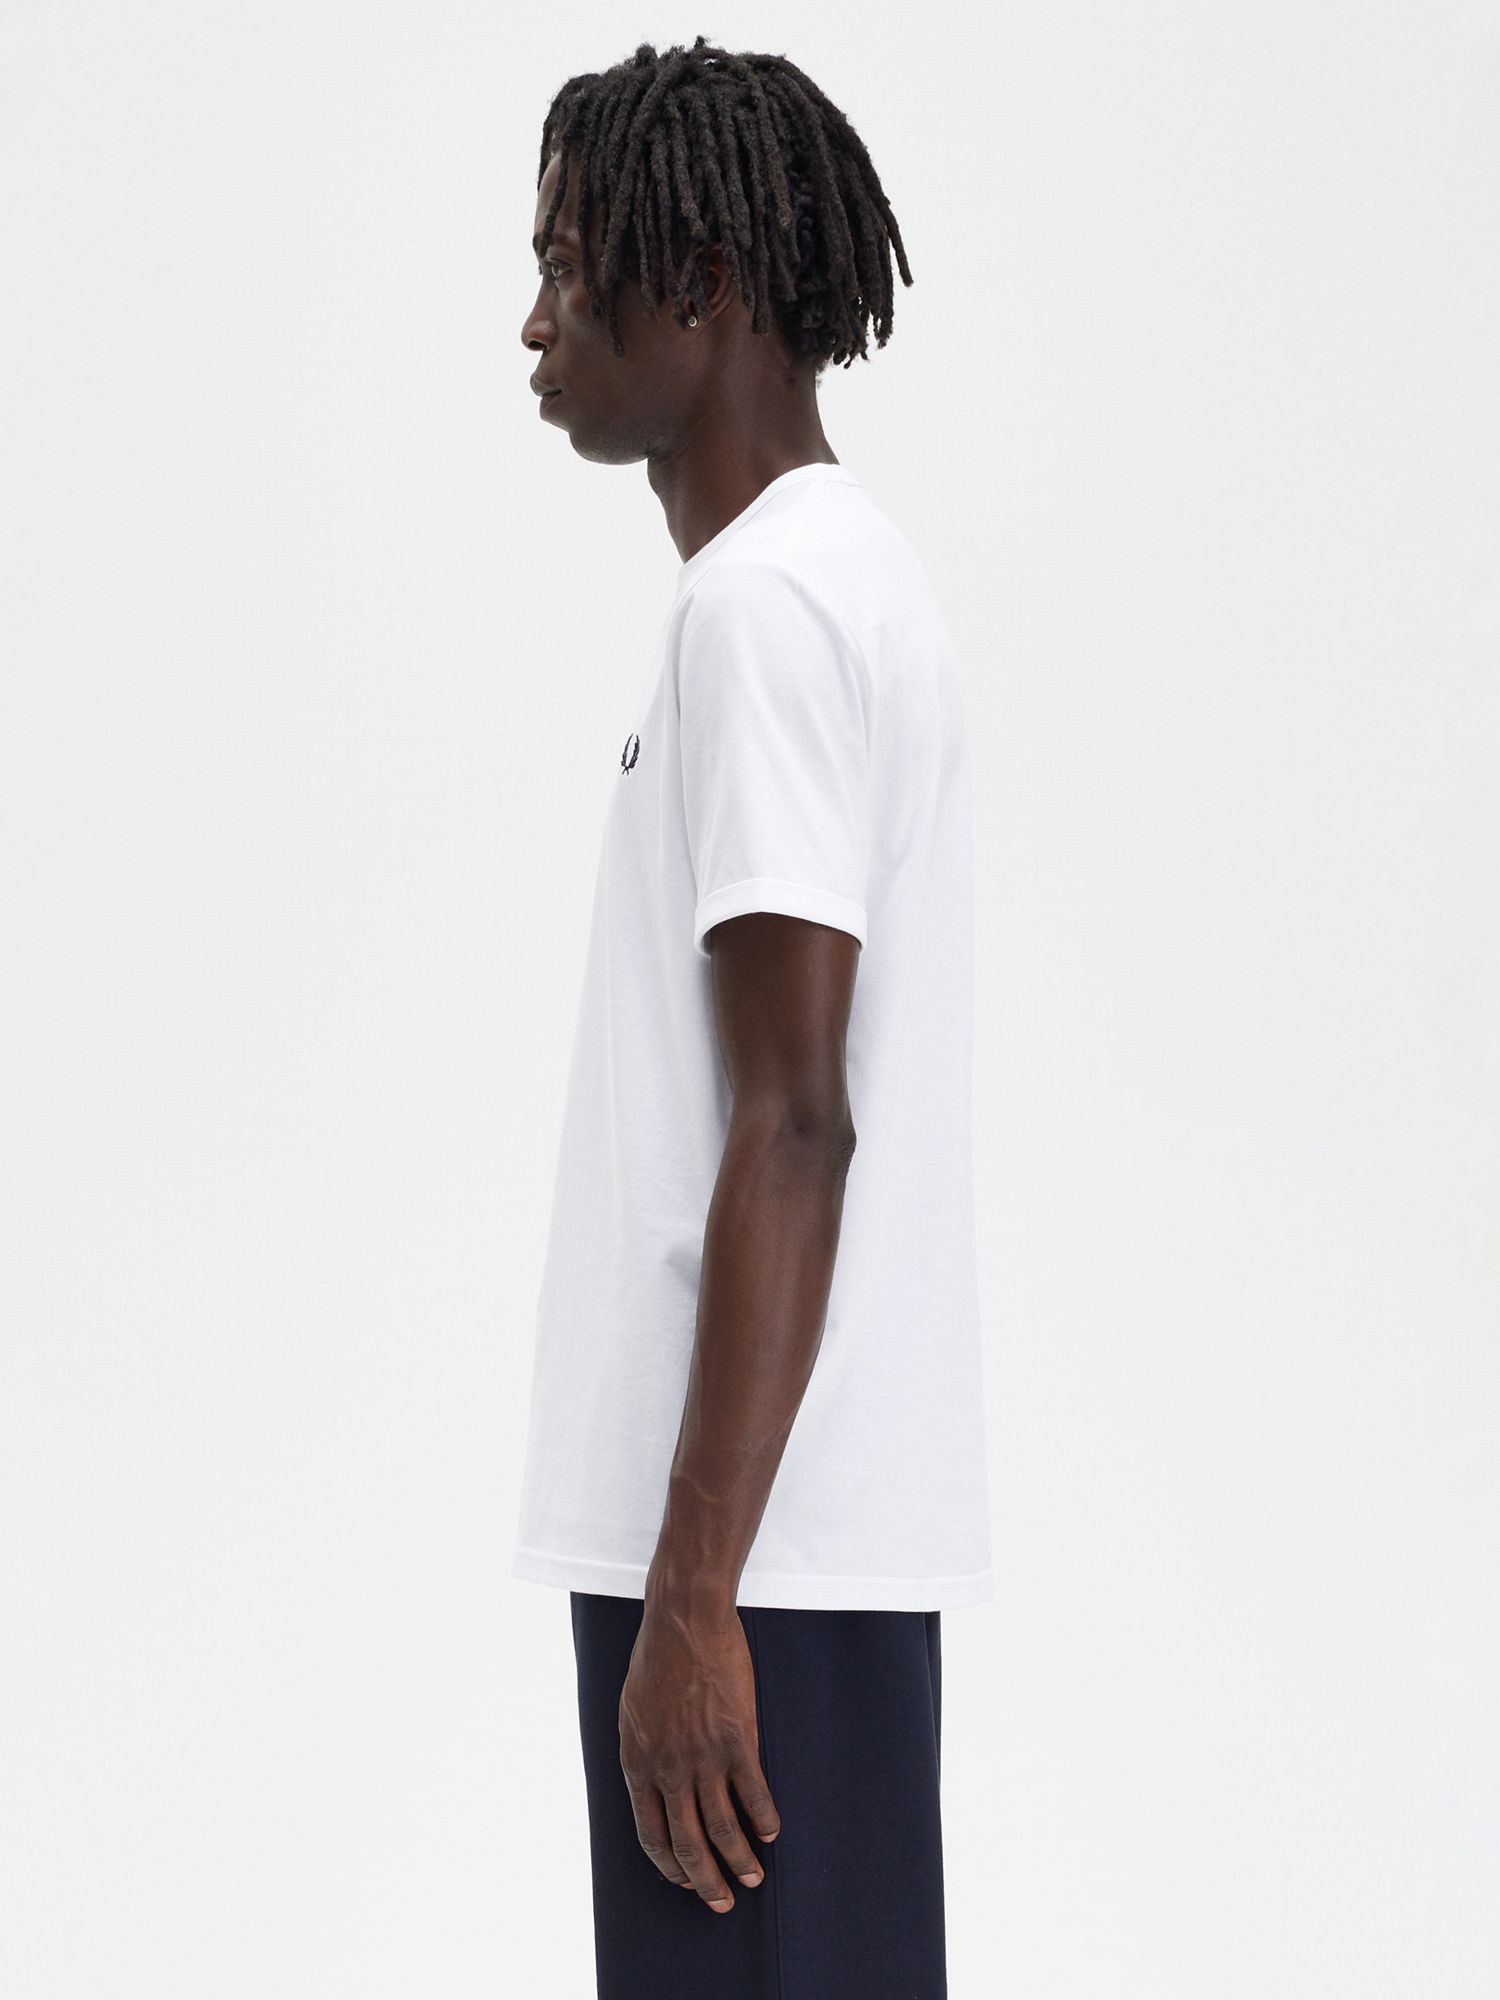 Fred Perry Ringer Crew Neck T-Shirt, White at John Lewis & Partners